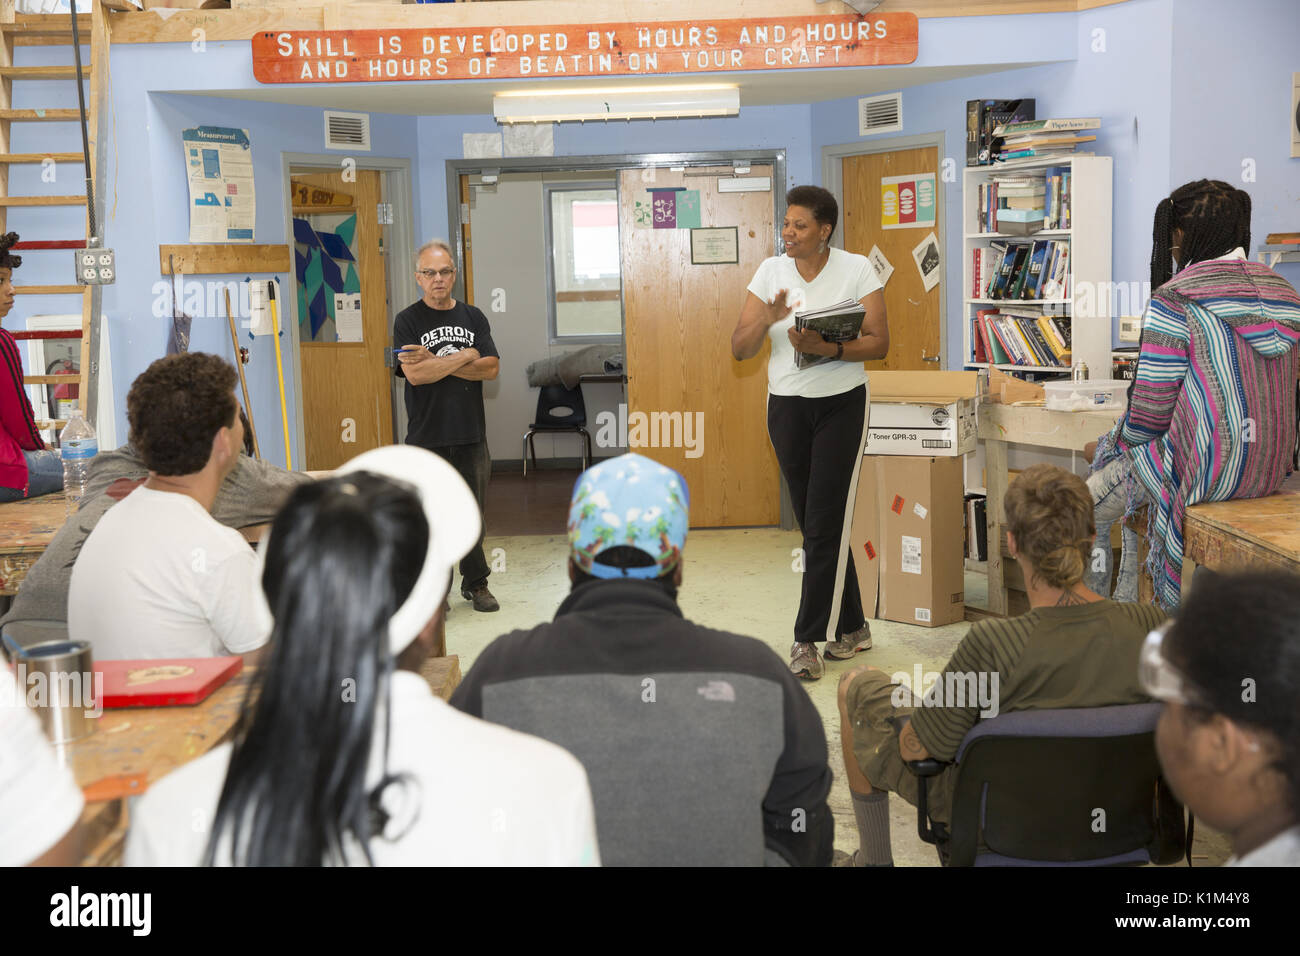 Students from the Detroit Community School participate in a motivational summer paid work program where they learn life, work and business skills in an entrepreneurial incubator type environment. Stock Photo